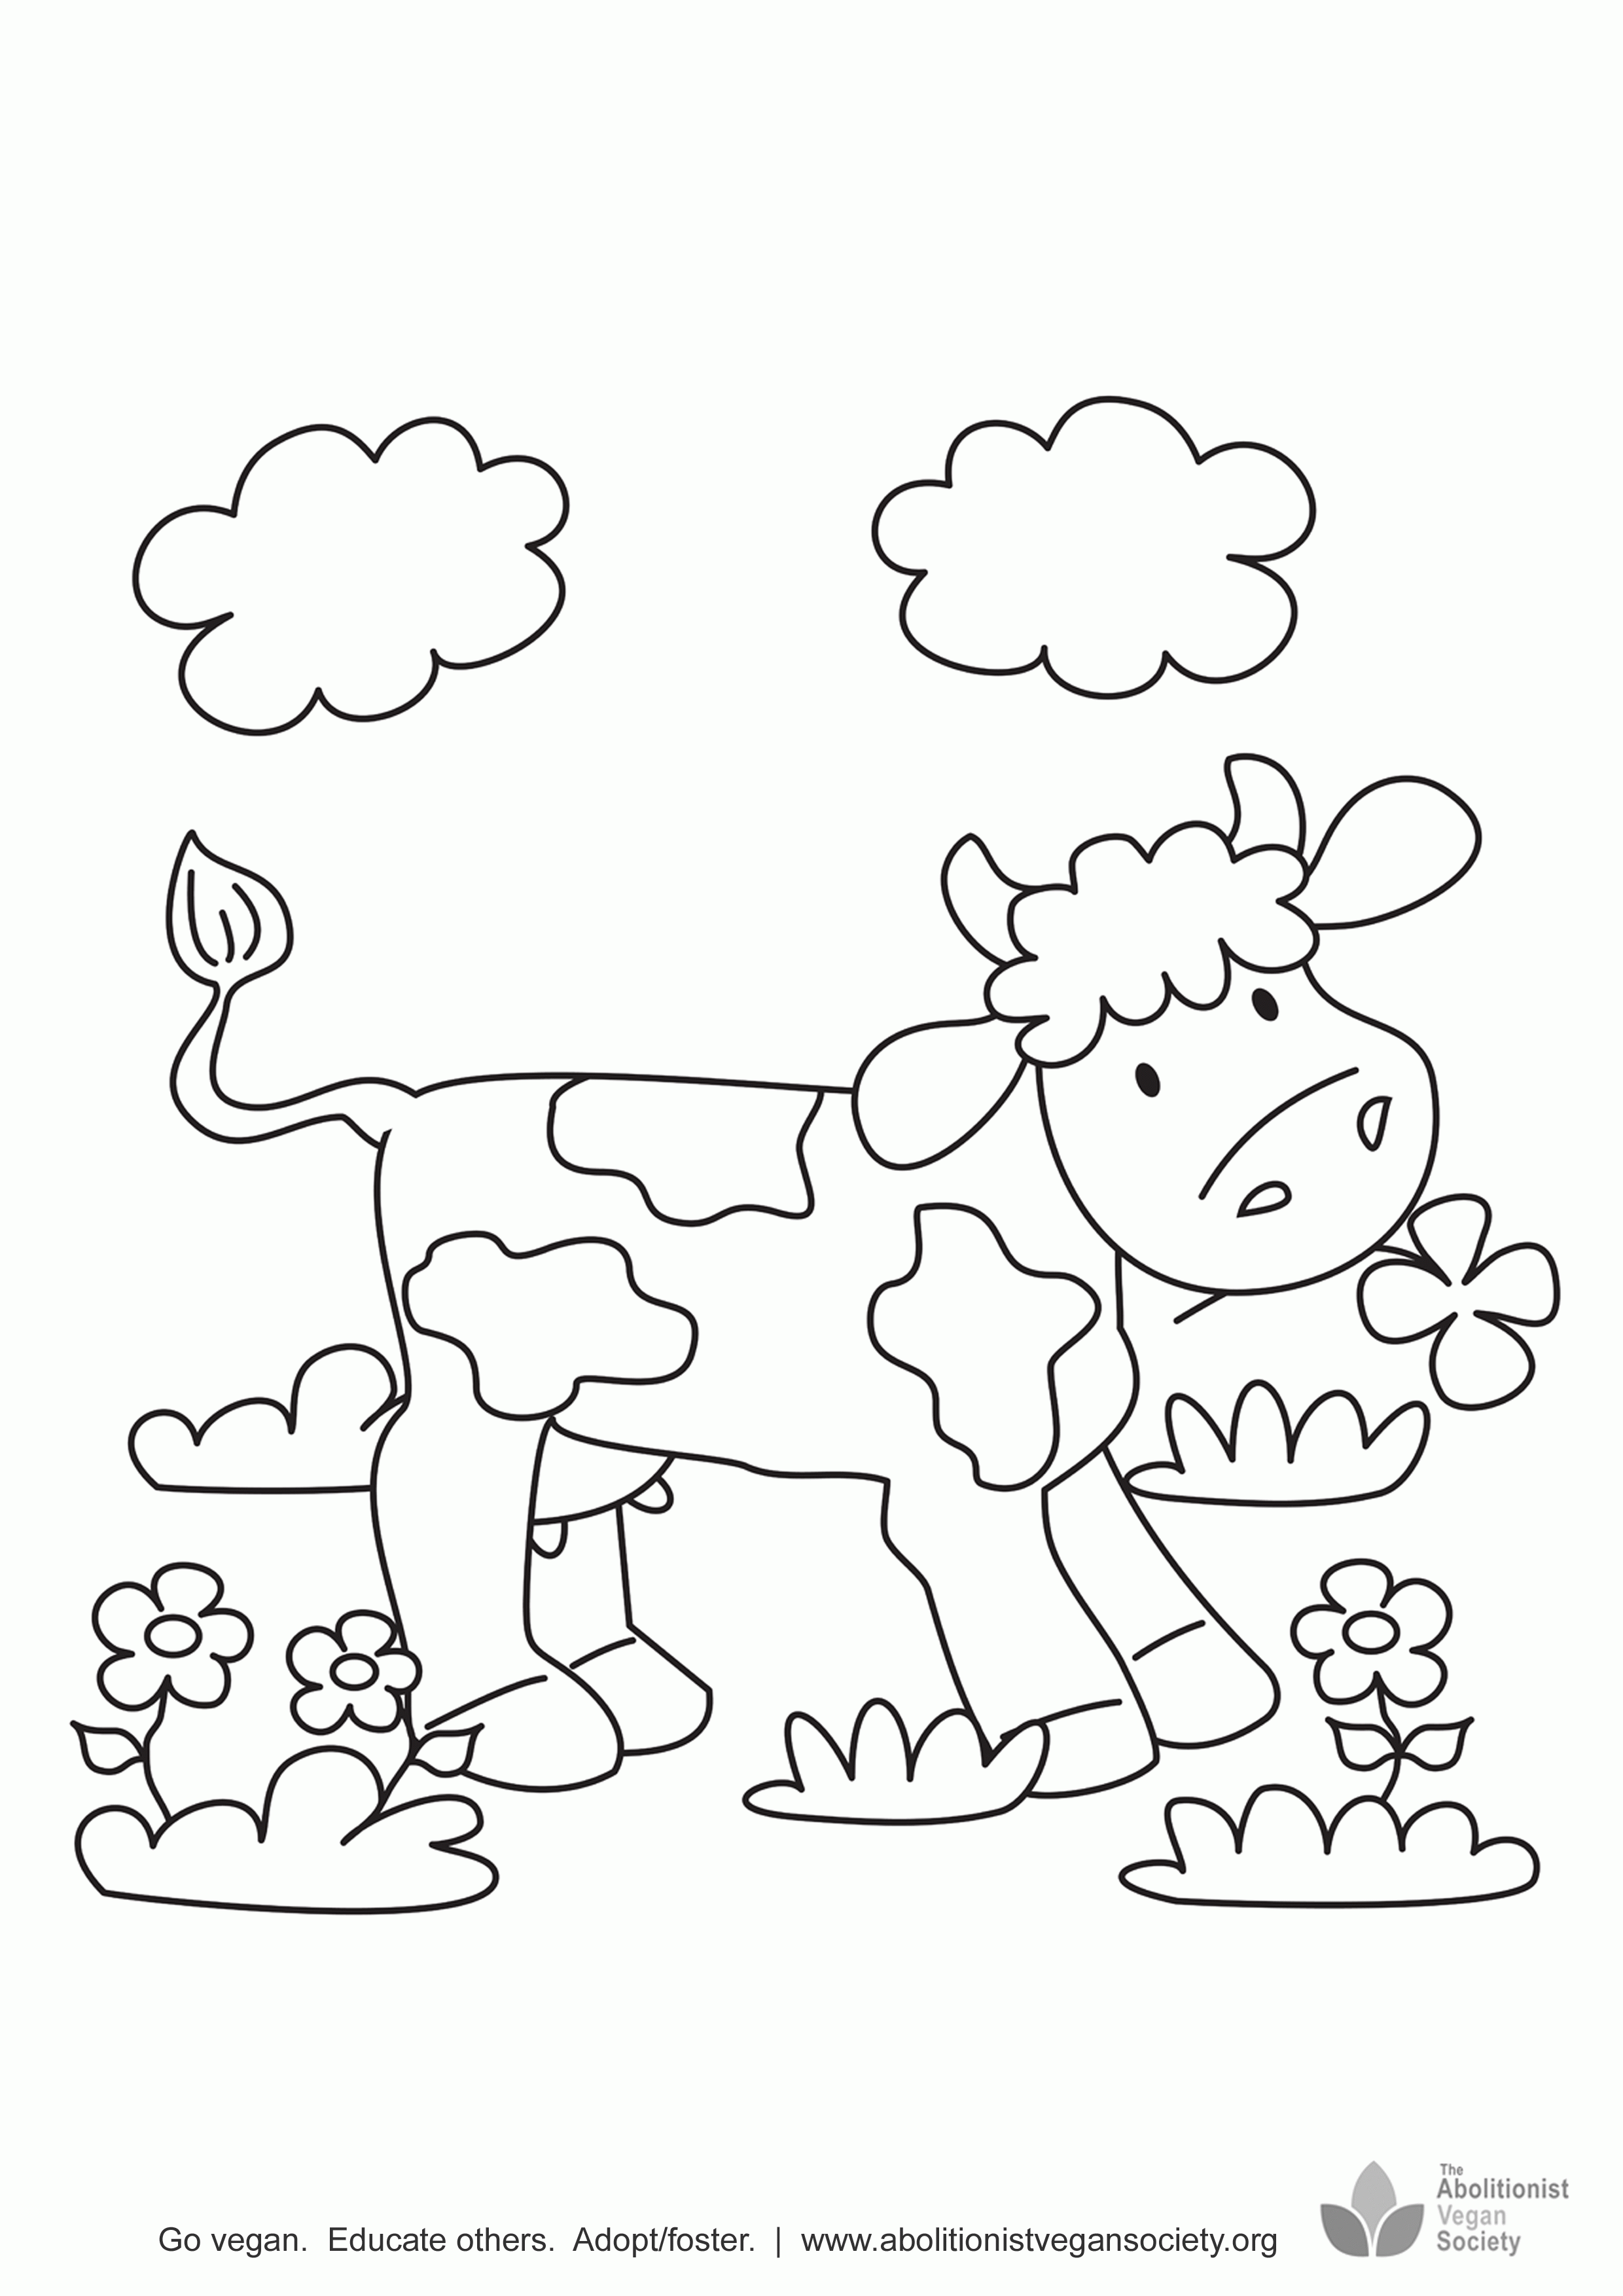 Coloring Pages for Children | The Abolitionist Vegan Society | The ...